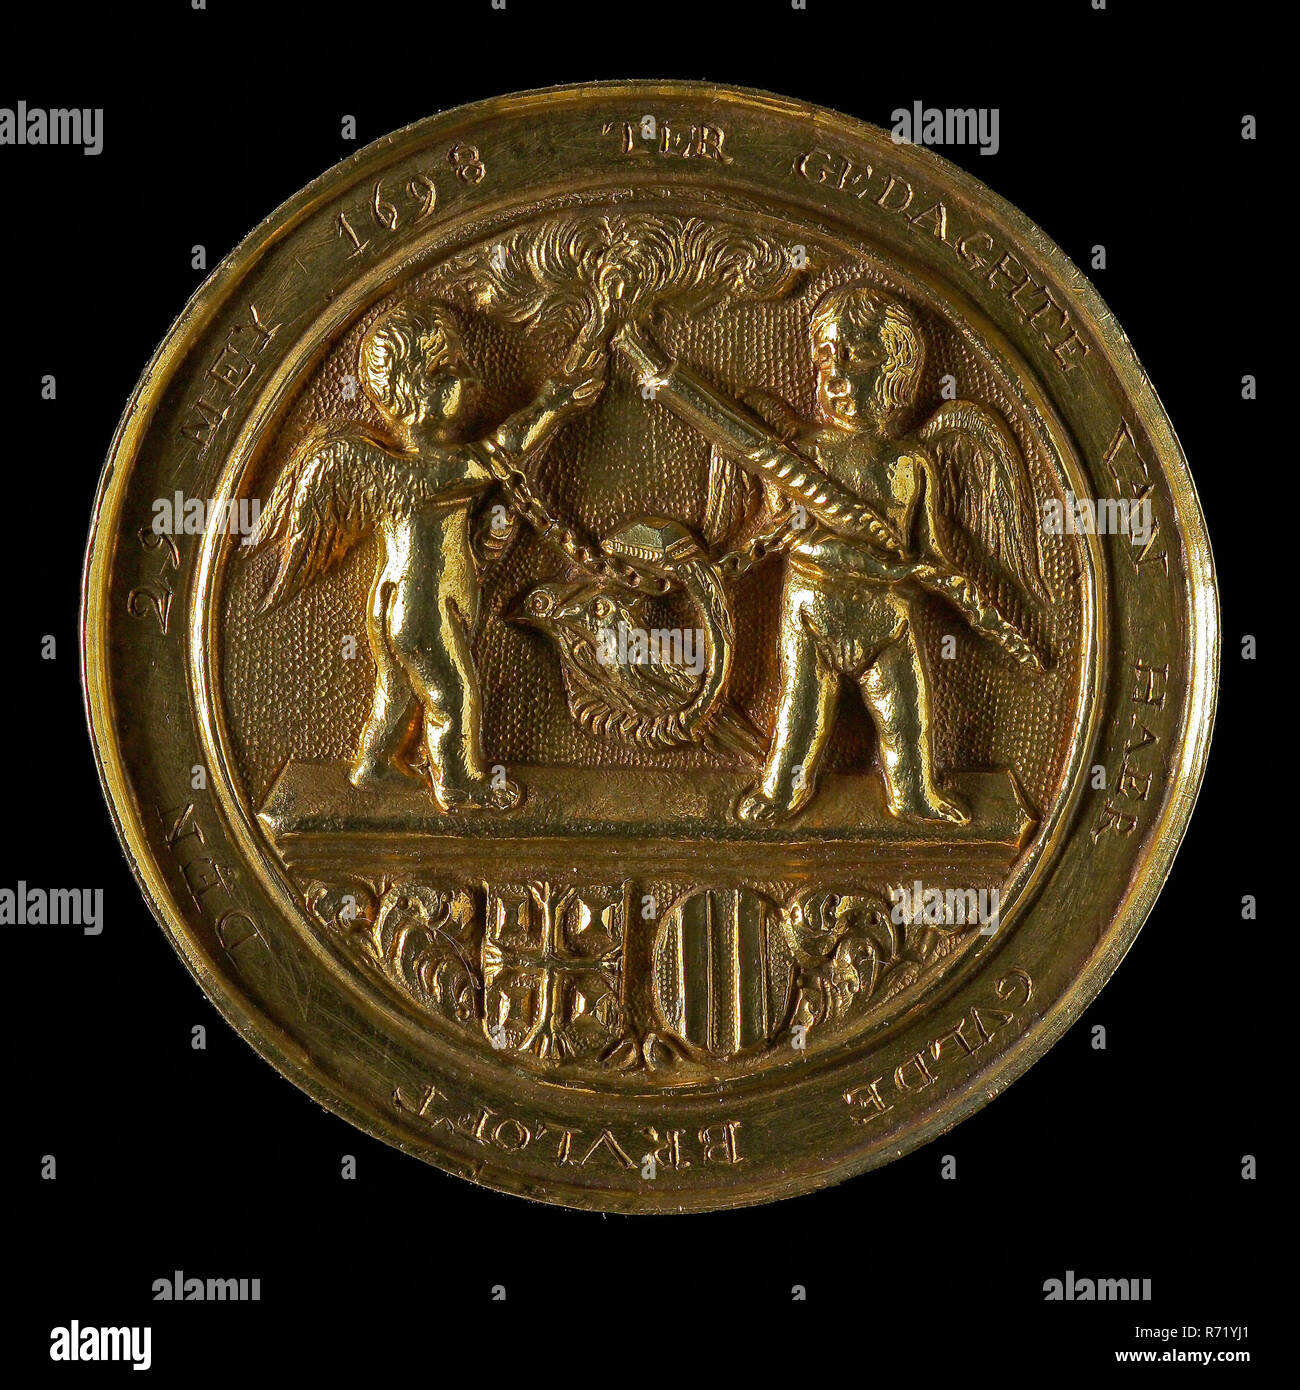 Medal on the 50-year marriage of Cornelis van Pijlsweert and Geertruijt van der Smade, wedding medal medallion medal gold, cast engraved Elevated edifice in high relief, TER THINK OF HAIR GULDE wULOFT DEN 29 MEY 1698 AANT KROOST VAN THIRD MEMBER DECLARED THAT HER T PARTY LONG LUGS MAY CORNELIS FROM PYLSWEER OUT 71 SPACE FROM DER SMADE OUT 72 JAER GETROUT IN ROTTERDAM DEN 29 MEY 1648 Rotterdam wedding 50-year marriage Stock Photo